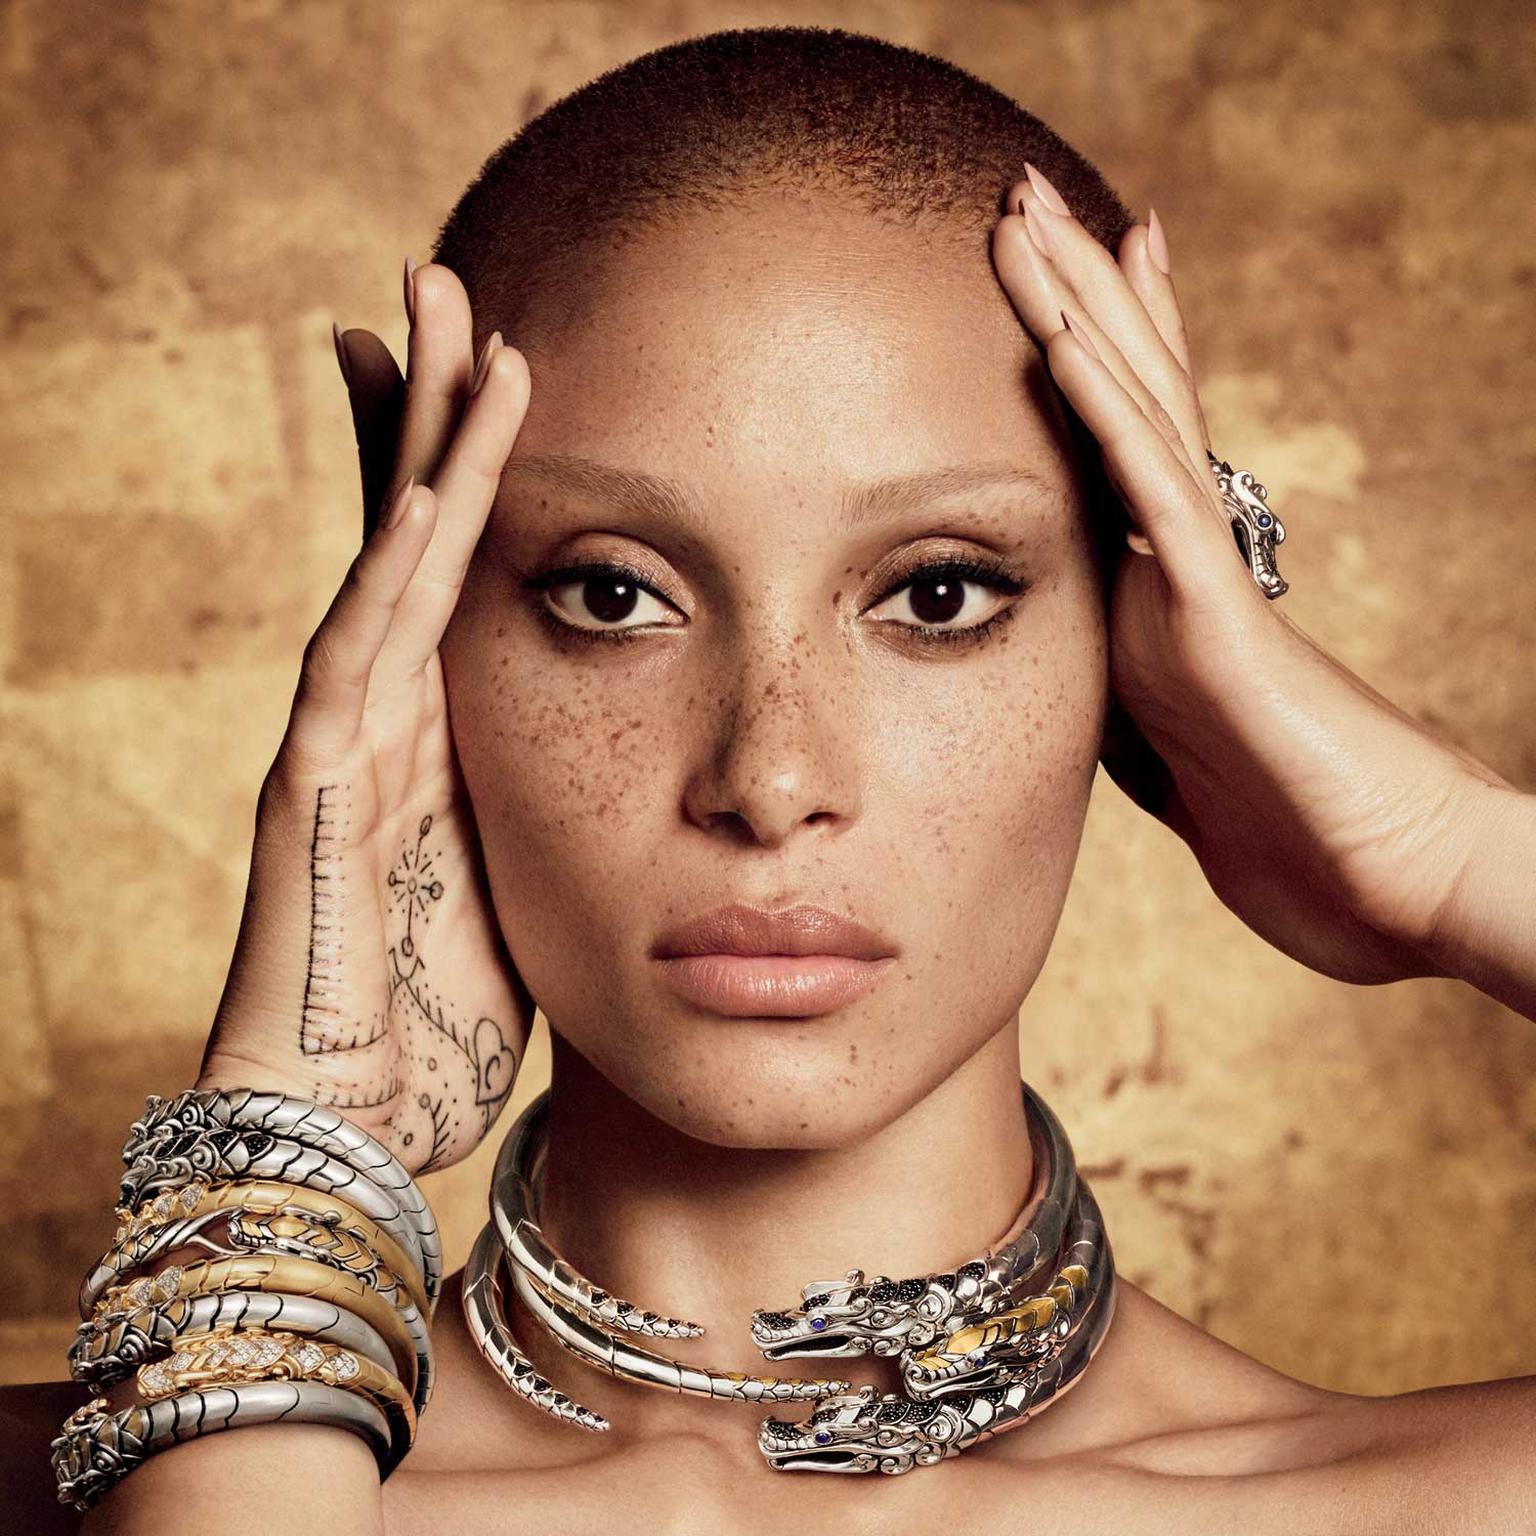 Adwoa Aboah stars in John Hardy's new Made for Legends ad campaign